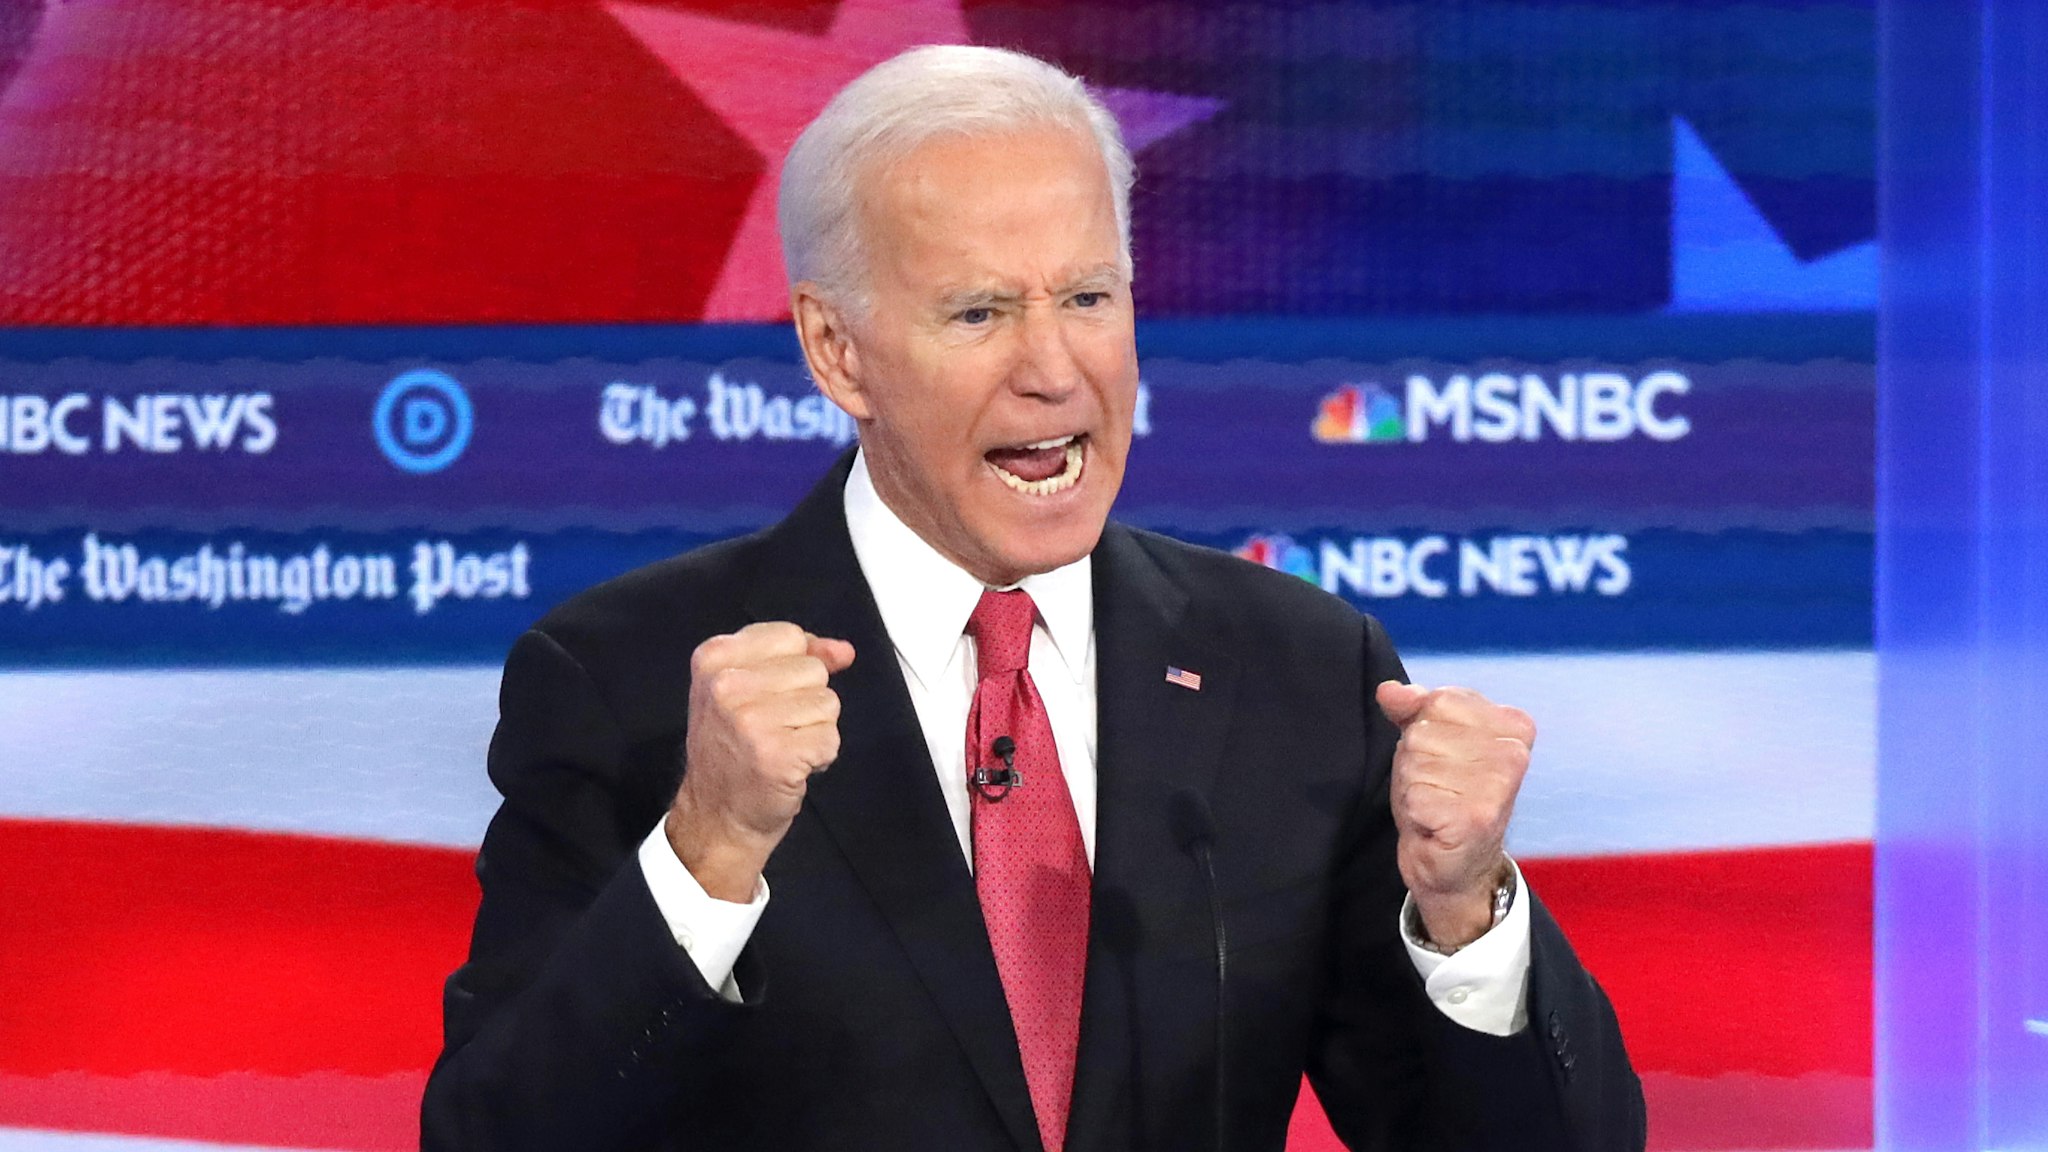 Former Vice President Joe Biden speaks during the Democratic Presidential Debate at Tyler Perry Studios November 20, 2019 in Atlanta, Georgia. Ten Democratic presidential hopefuls were chosen from the larger field of candidates to participate in the debate hosted by MSNBC and The Washington Post.